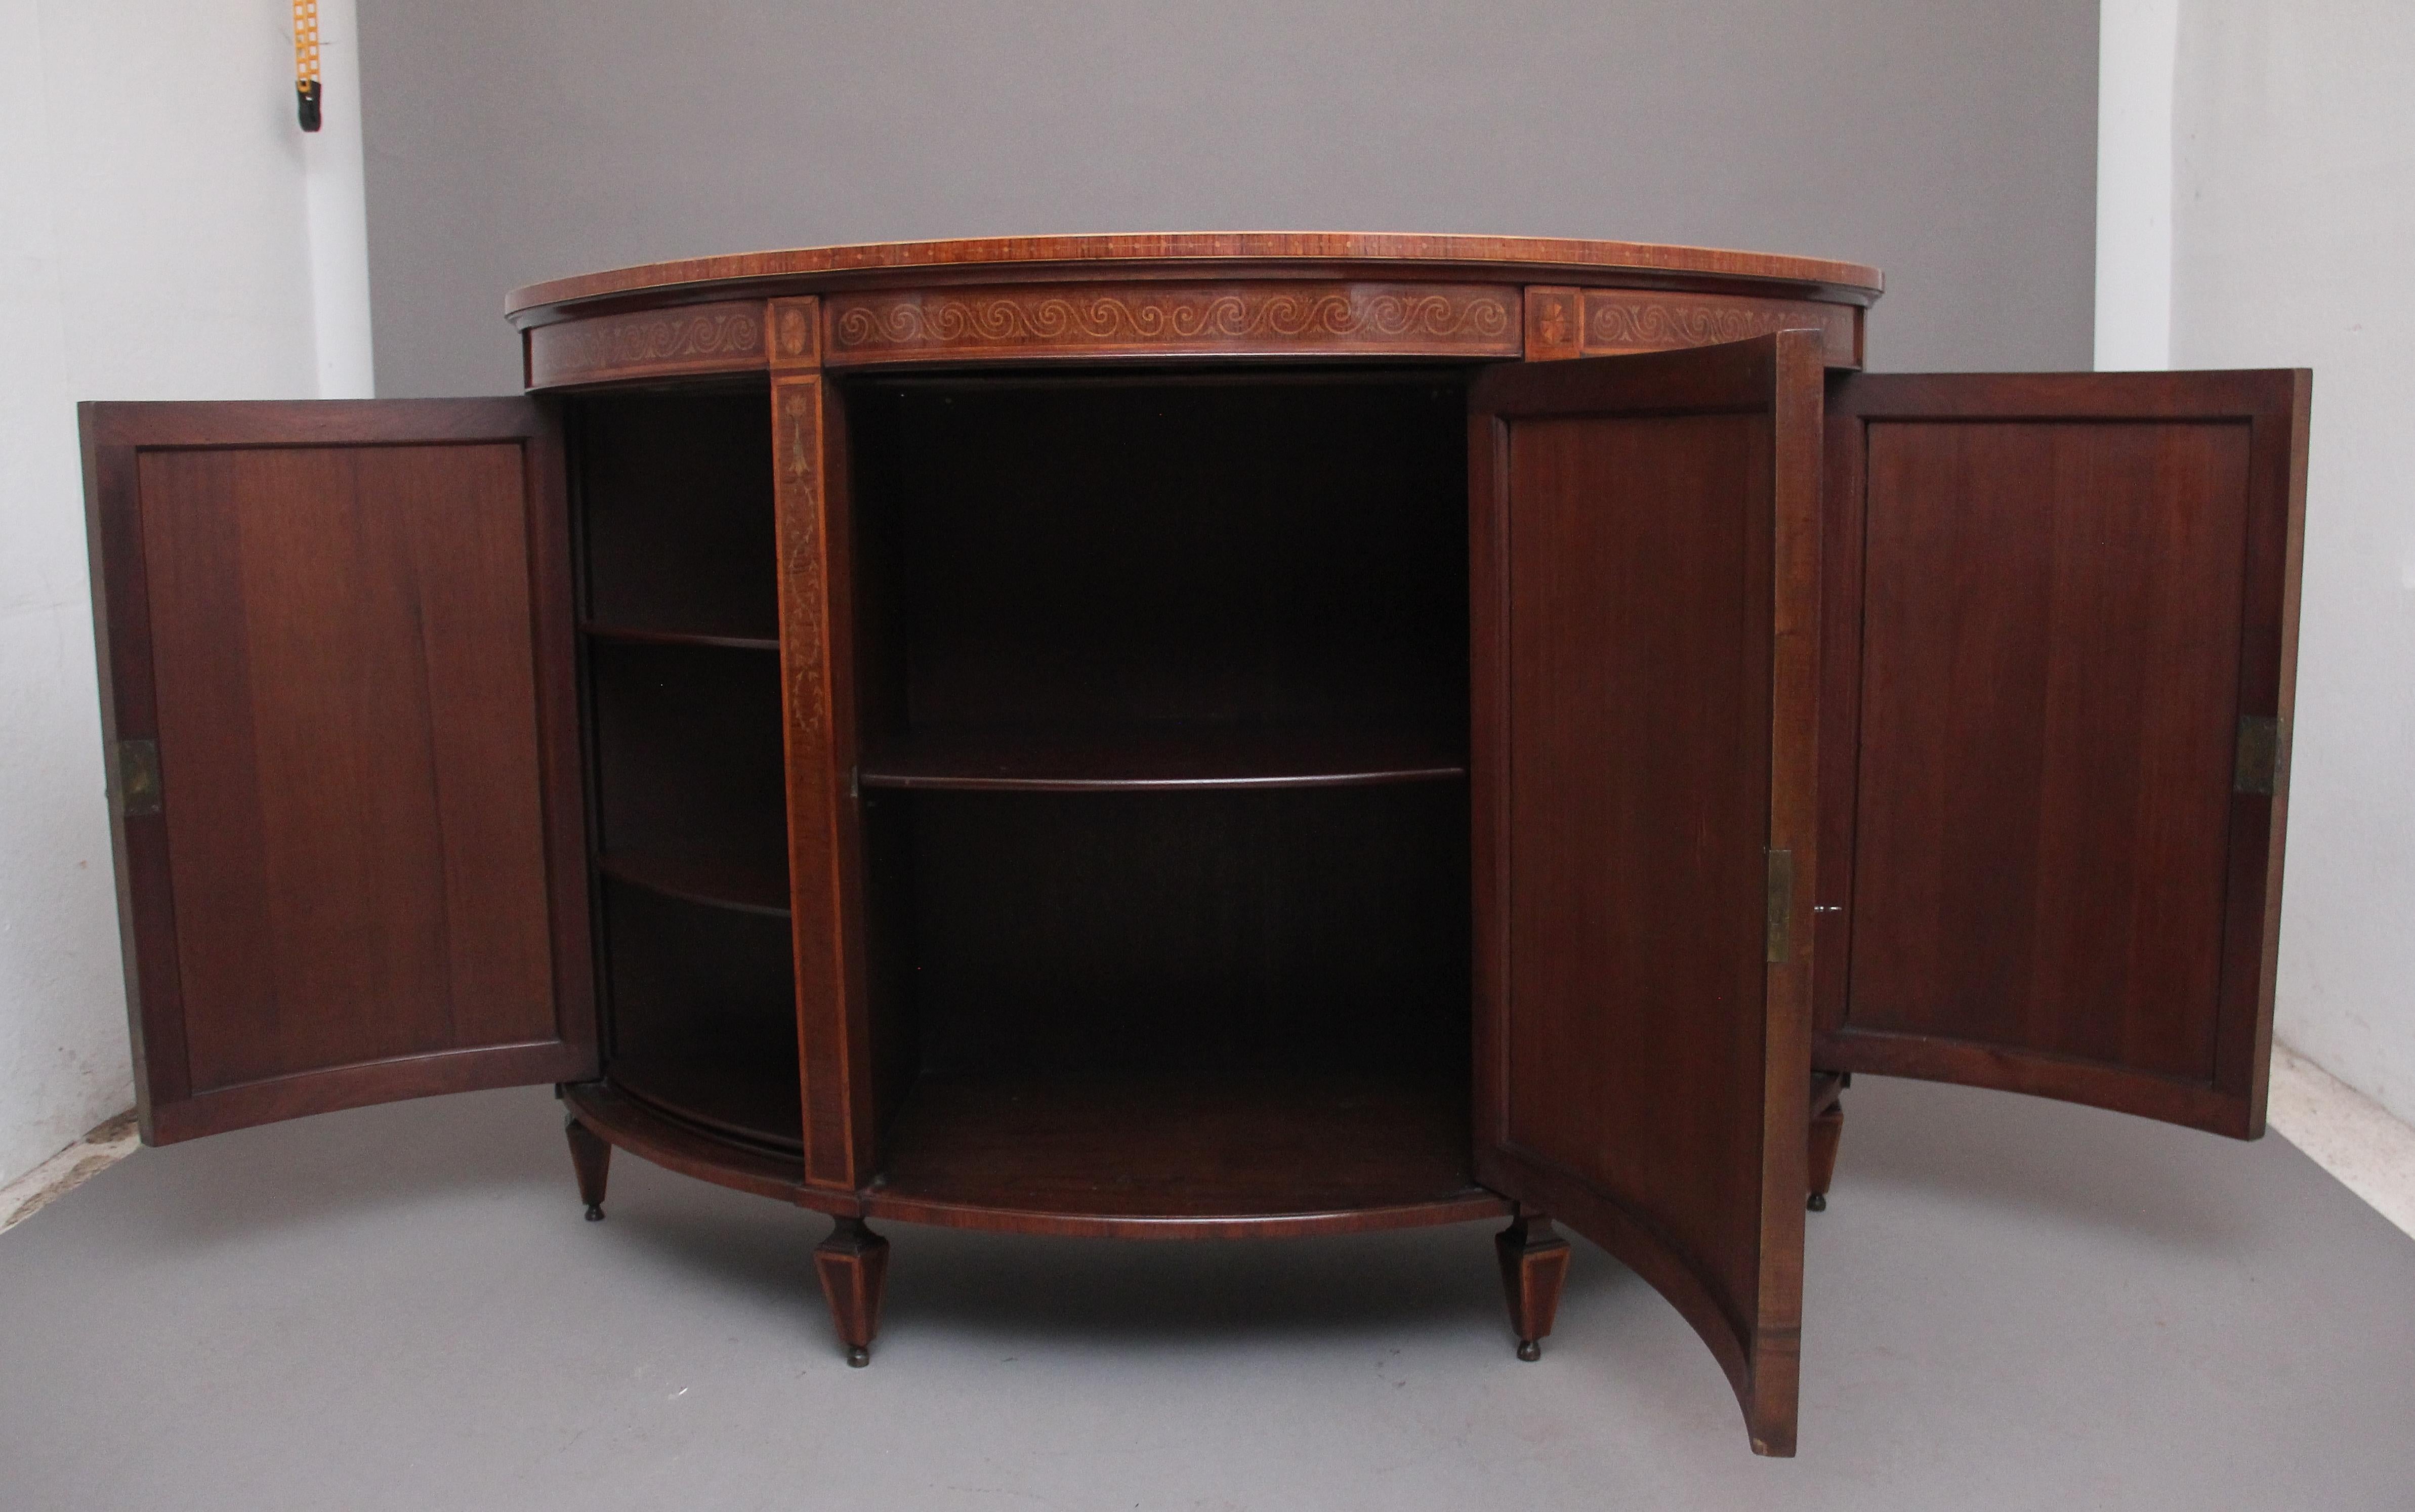 A fabulous quality 19th Century mahogany and inlaid demi-lune side cabinet in the Sheraton style, the shaped and inlaid top cooperating a decorative urn and floral inlay, the frieze below decorated with a swirl inlay pattern, the cabinet having a